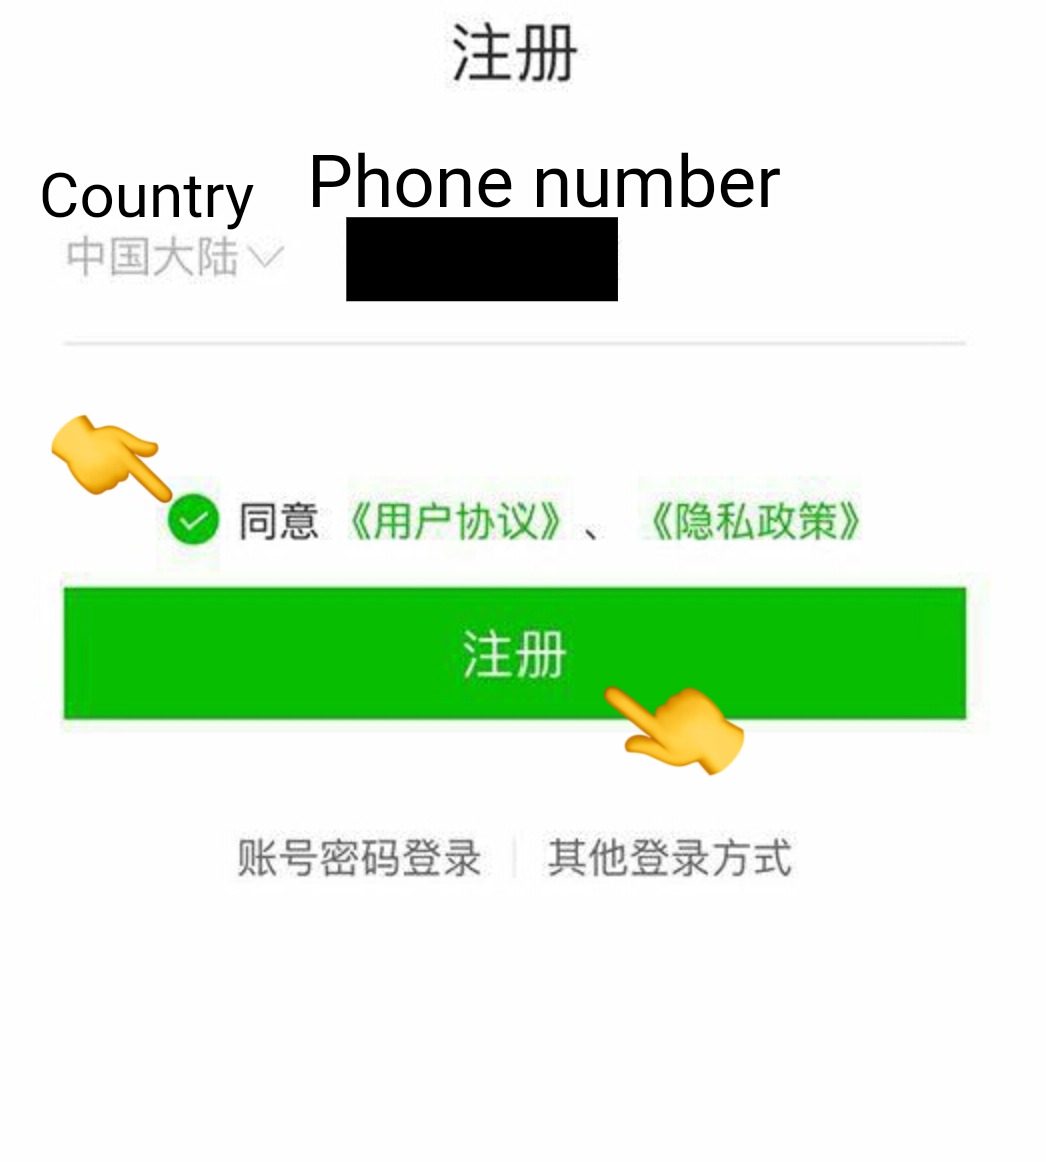 4. Select the country of the phone number that you chose and paste the phone number you copied earlier, then tick the circle & press the green button